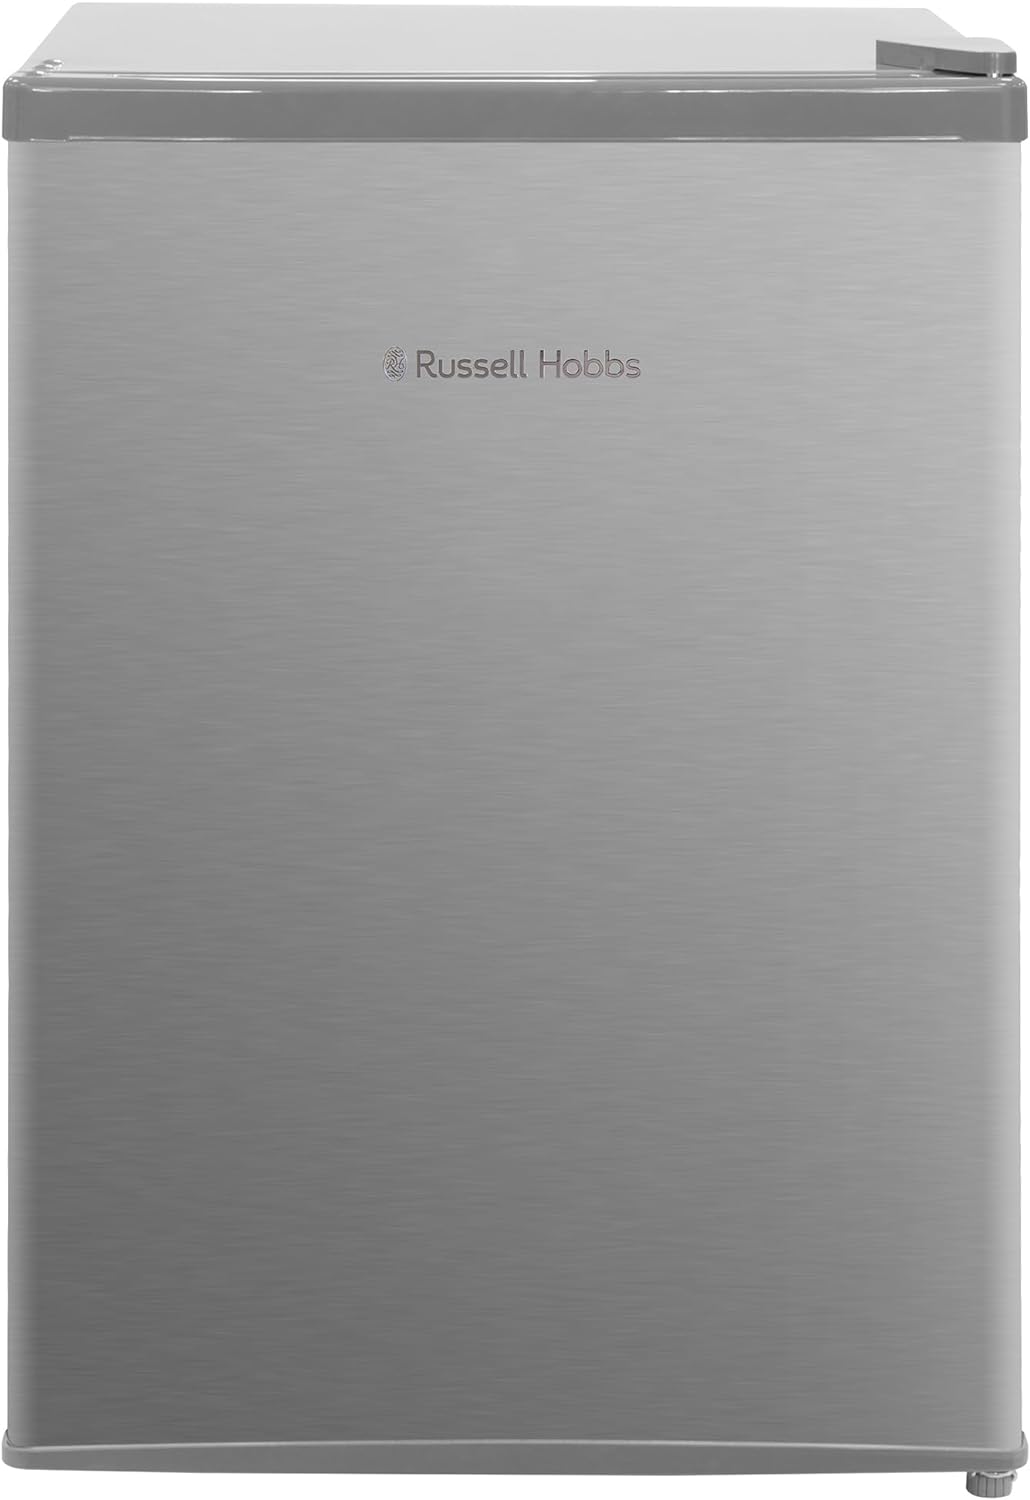 Russell Hobbs RHTTF67W 66 Litre Reversible Doors F Table Top Mini Fridge, White - Amazing Gadgets Outlet